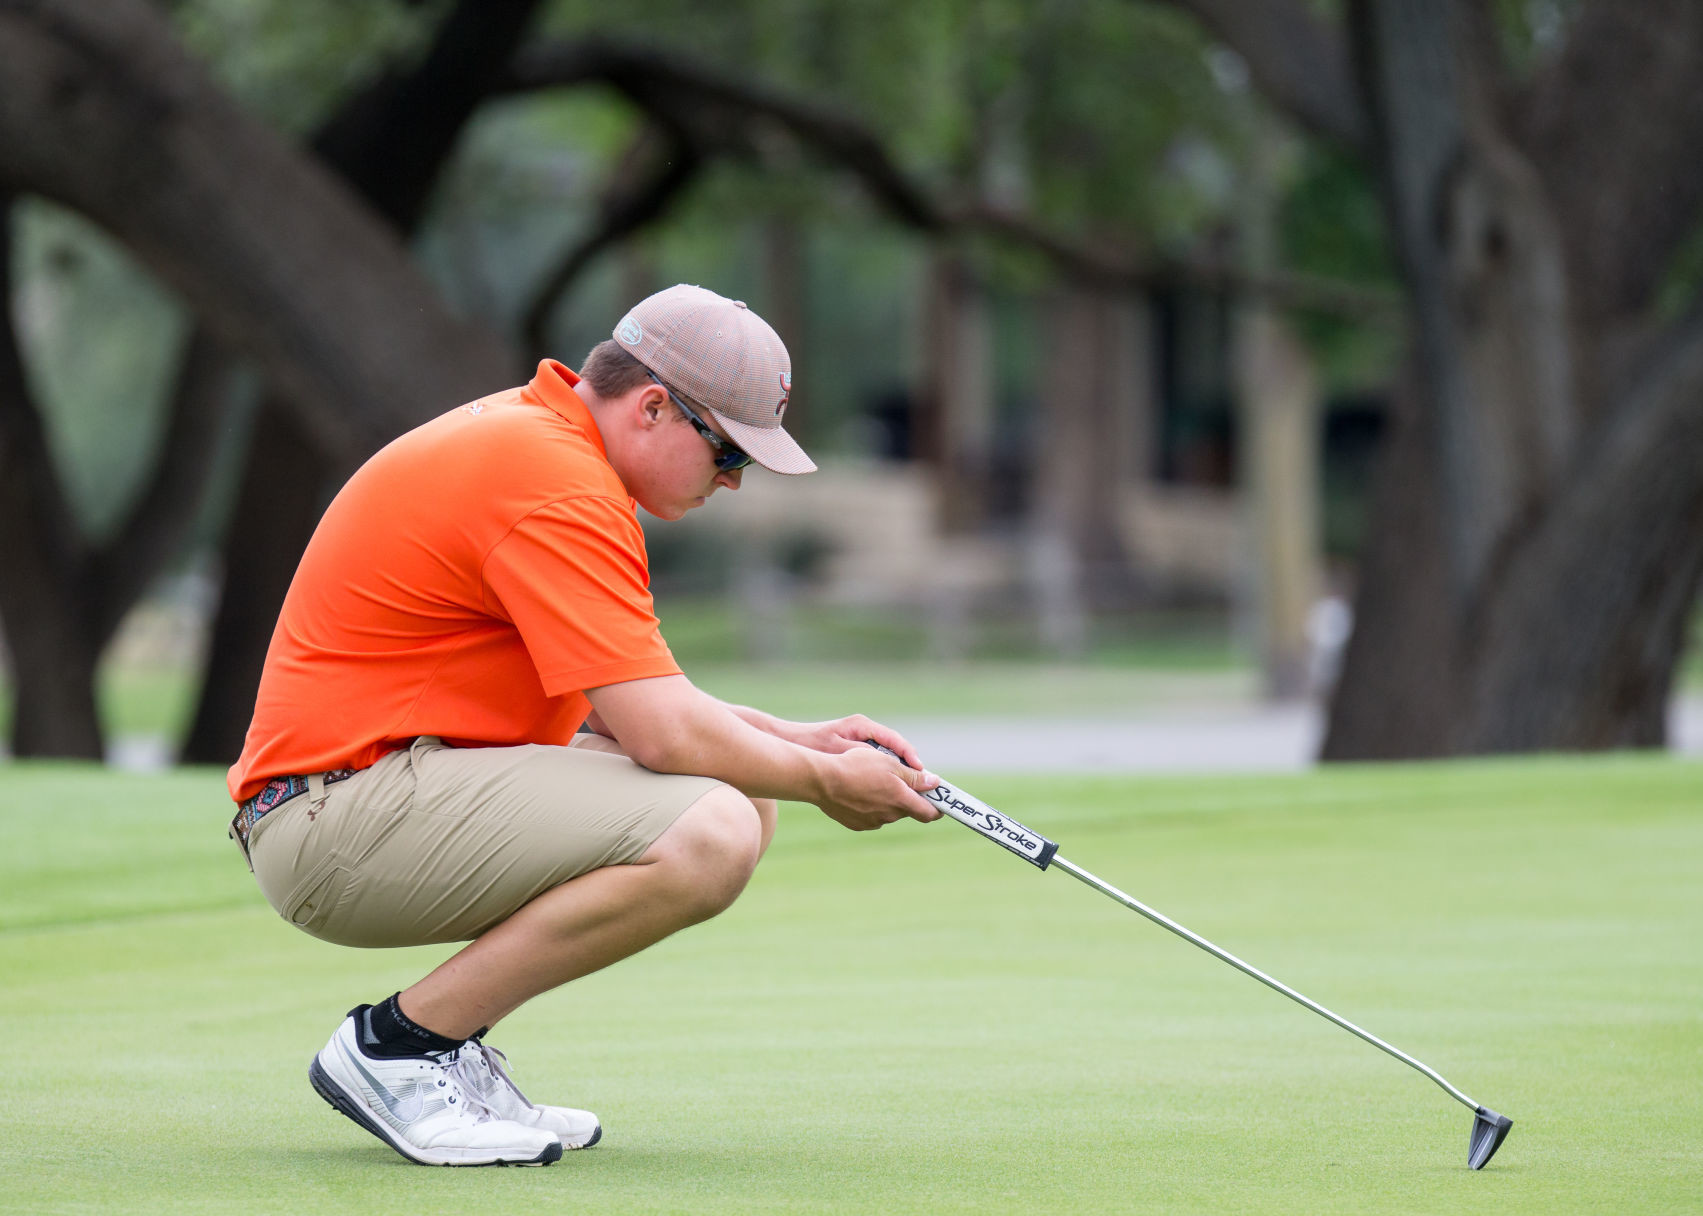 Gonzales High School's Jake Barnick ponders a putt on the No. 10 green during the opening round of the Class 4A boys state golf tournament at Apple Rock Golf Course in Horseshoe Bay, Texas, on Monday, May 22, 2017.